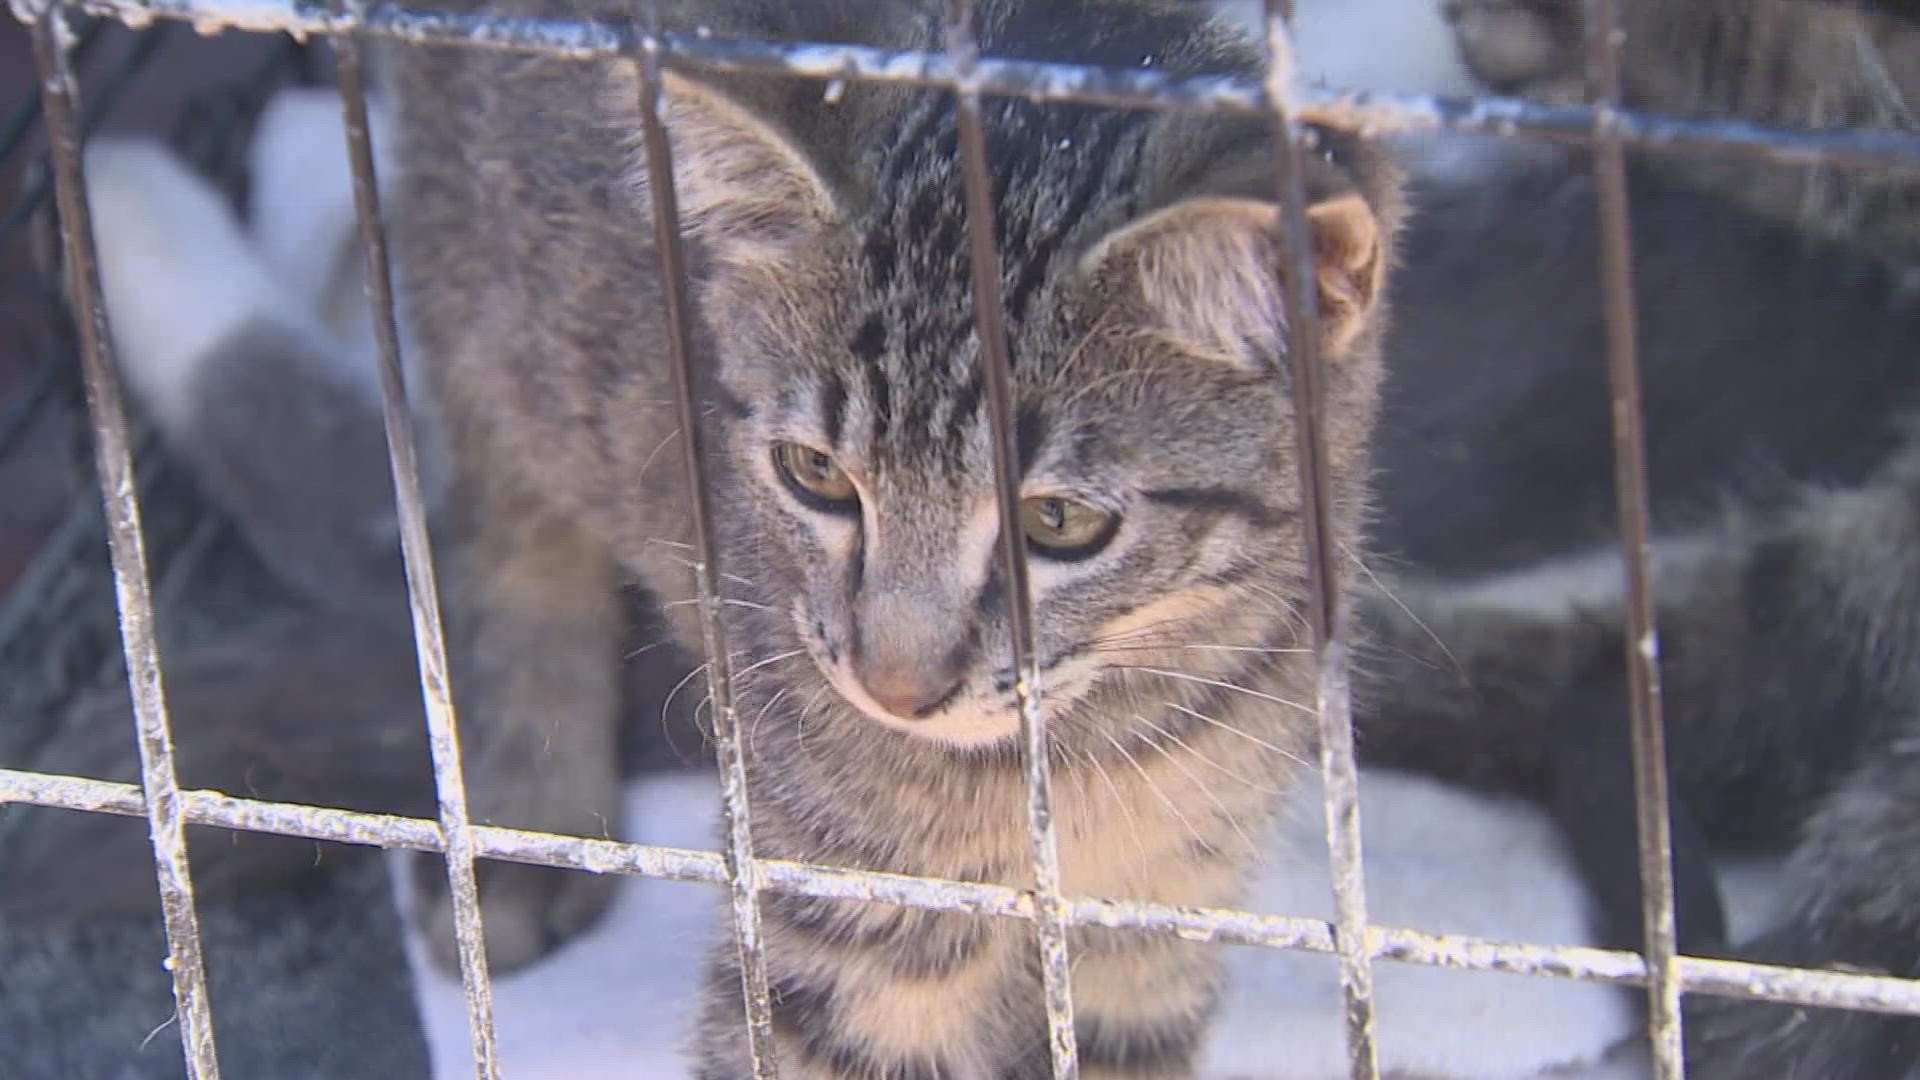 Pierce County seeing animal shelters reach capacity 